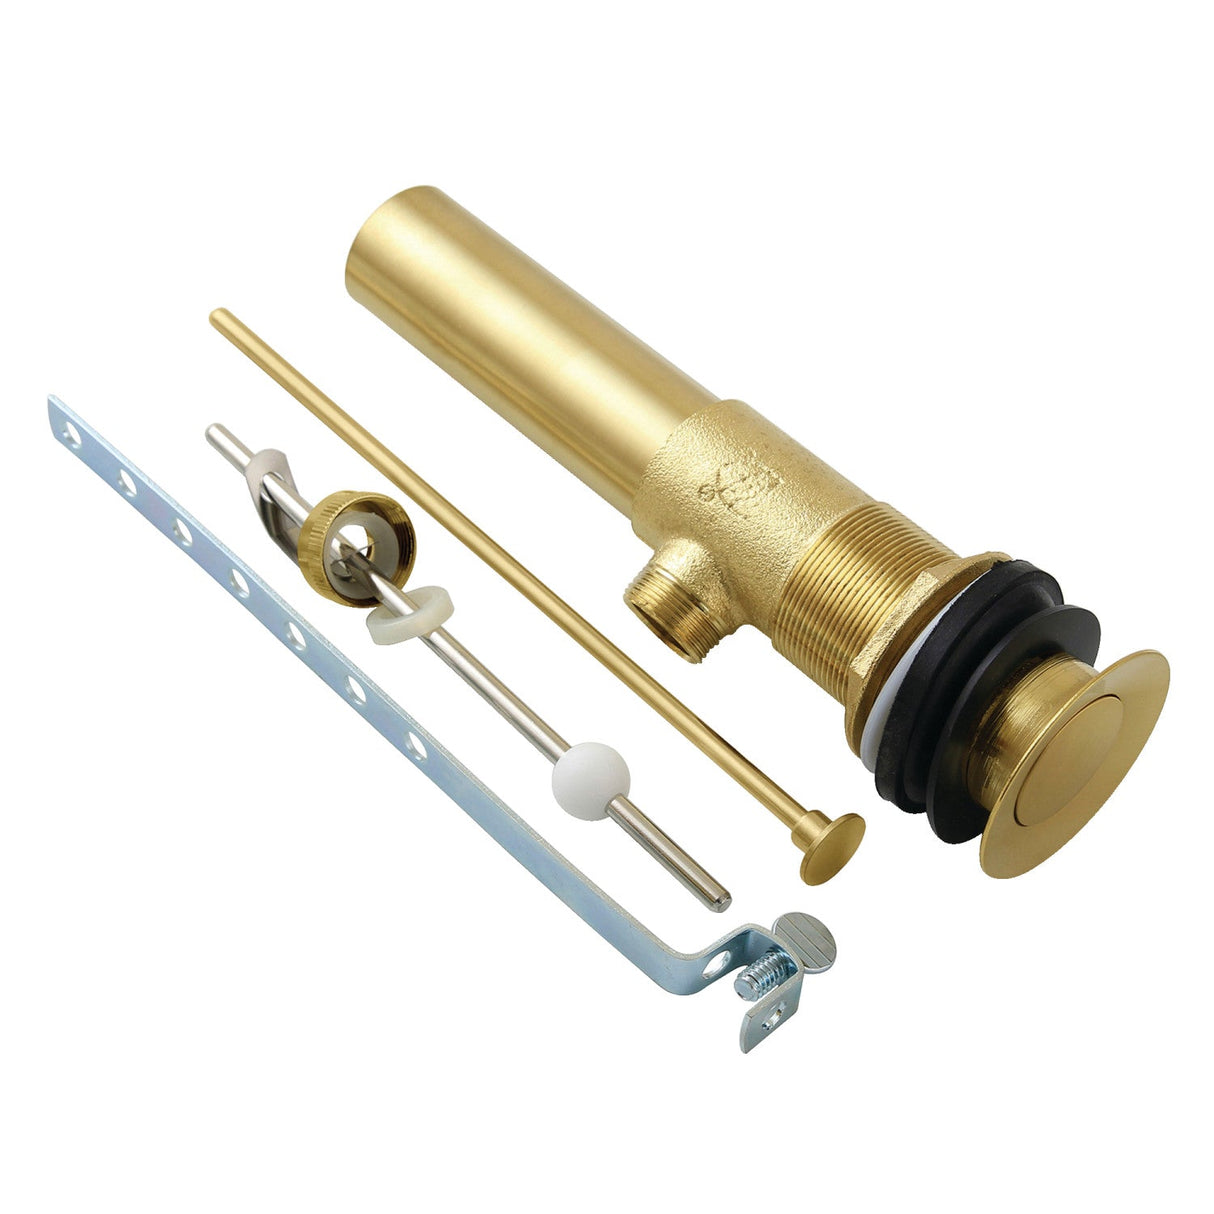 Made To Match KB1117 Brass Pop-Up Bathroom Sink Drain with Overflow, 22 Gauge, Brushed Brass